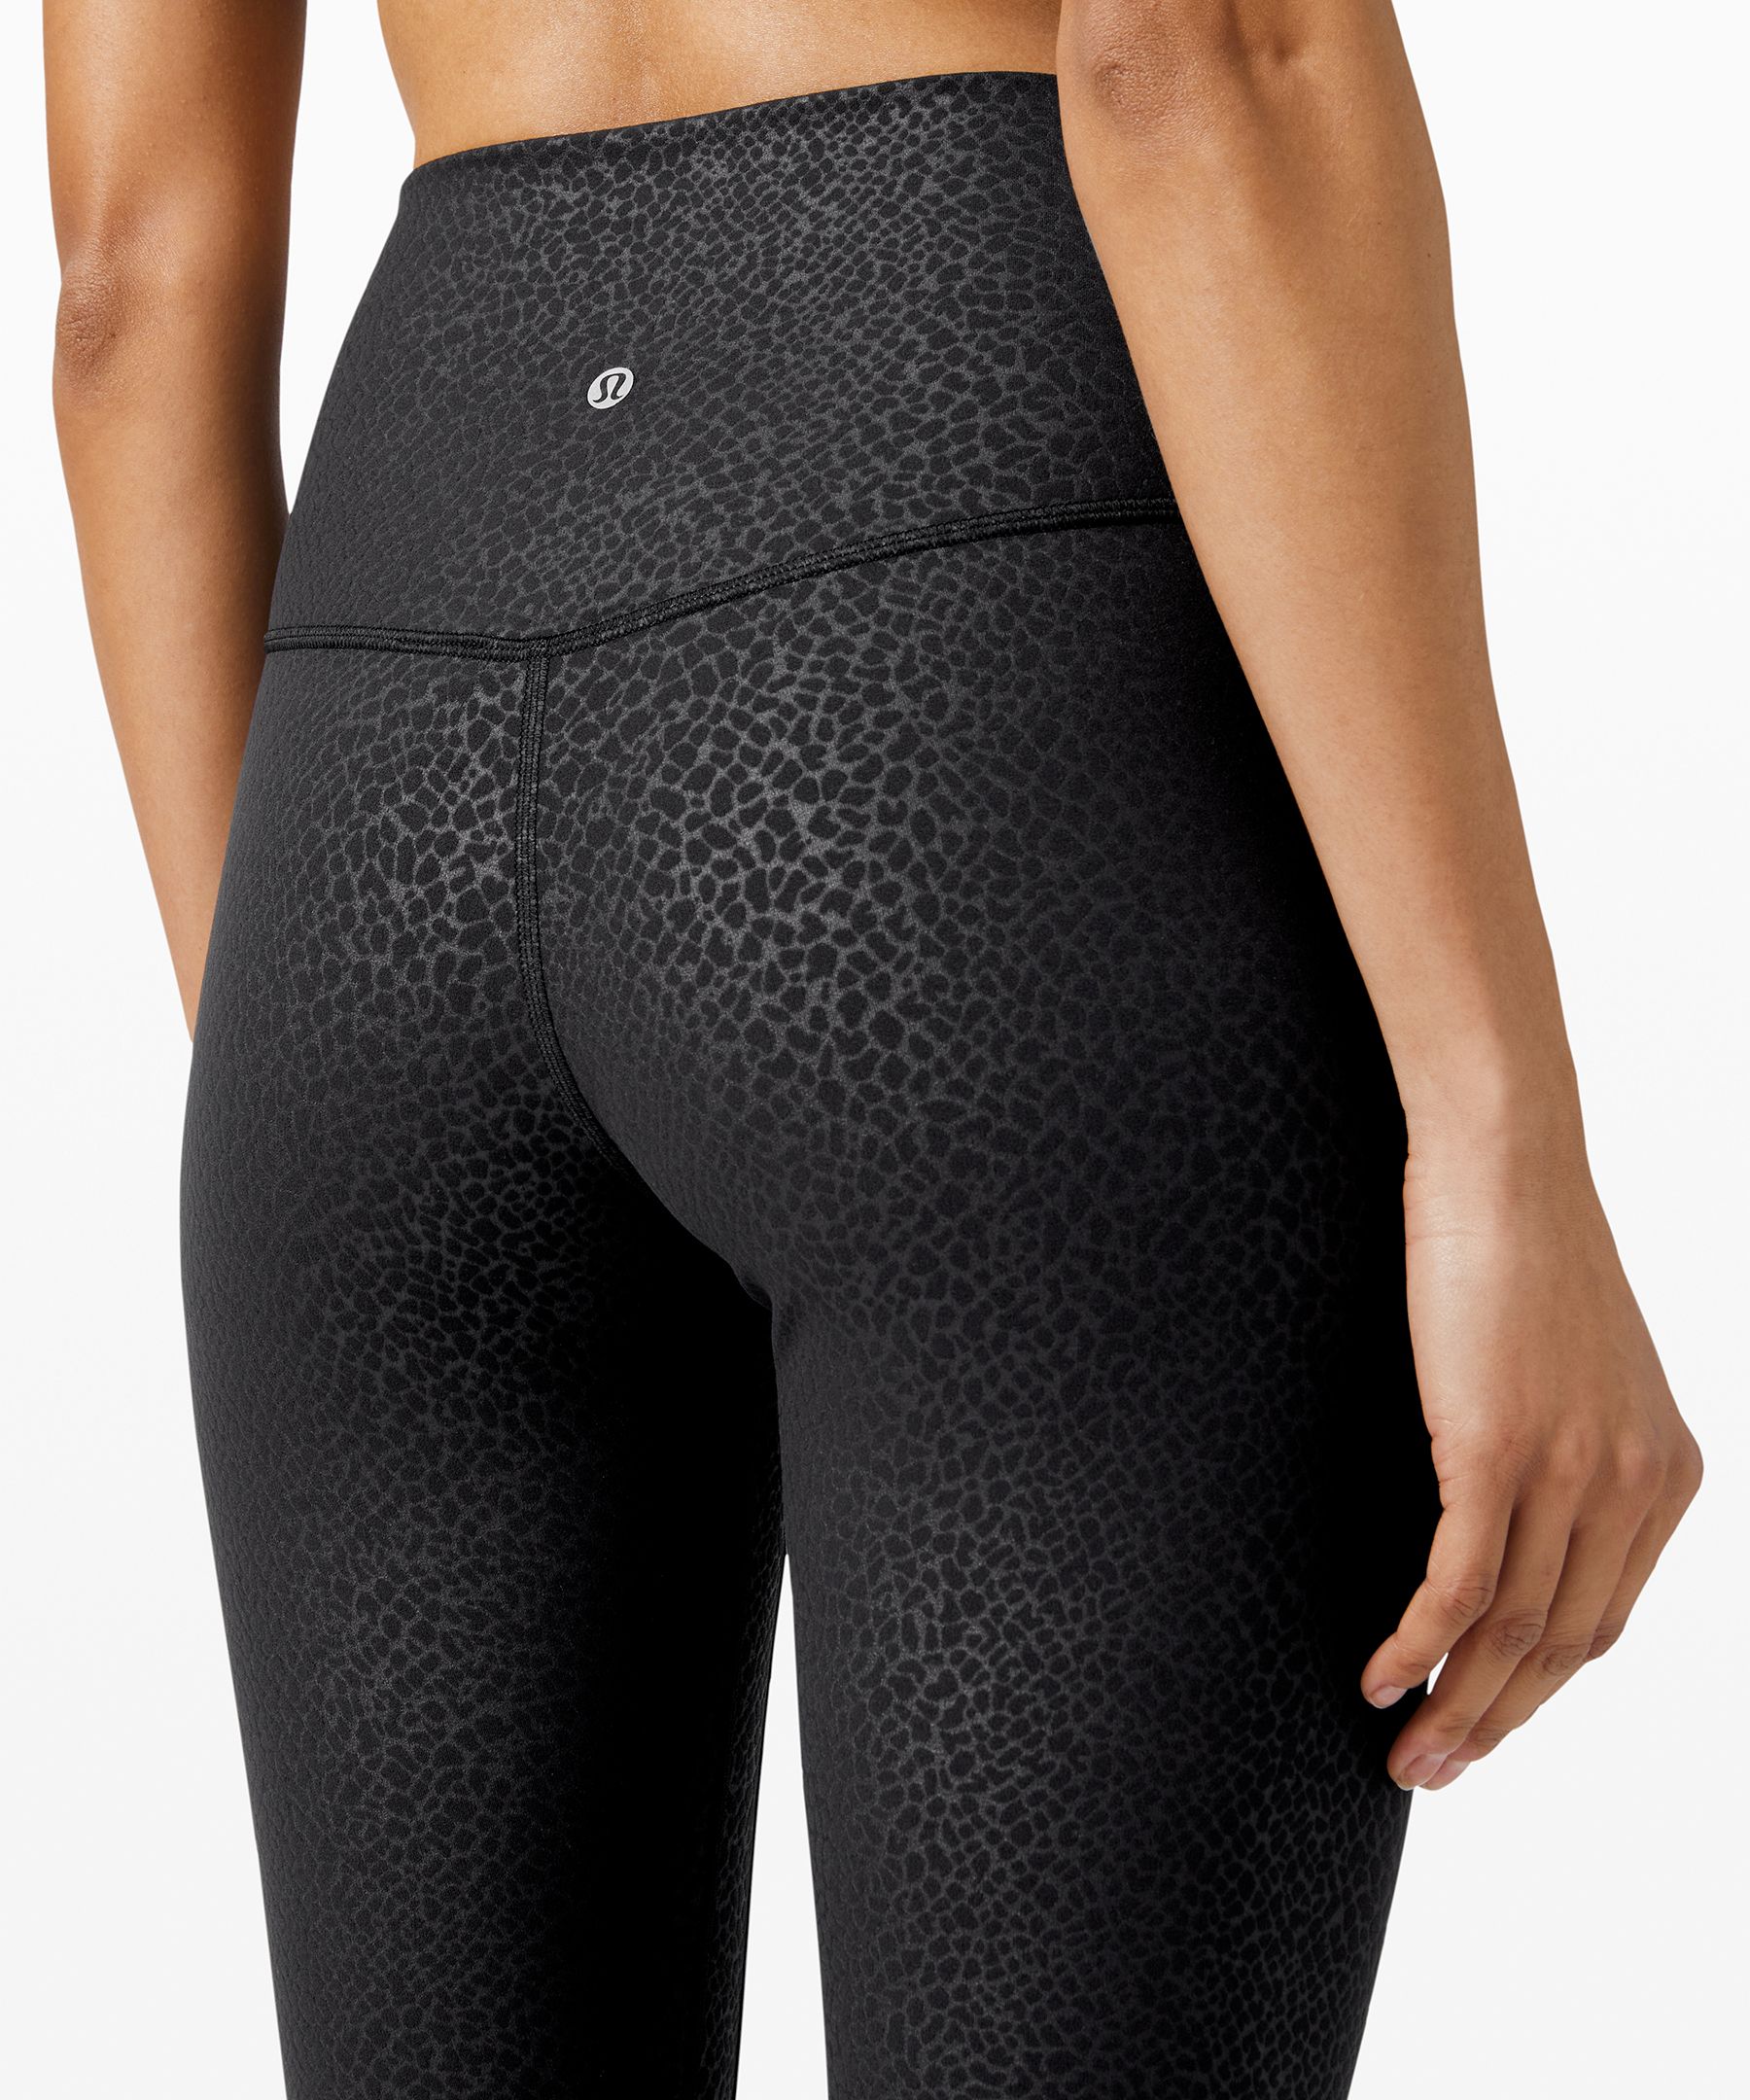 Lululemon Align Pant II 25 - Incognito Camo Pink Taupe Multi